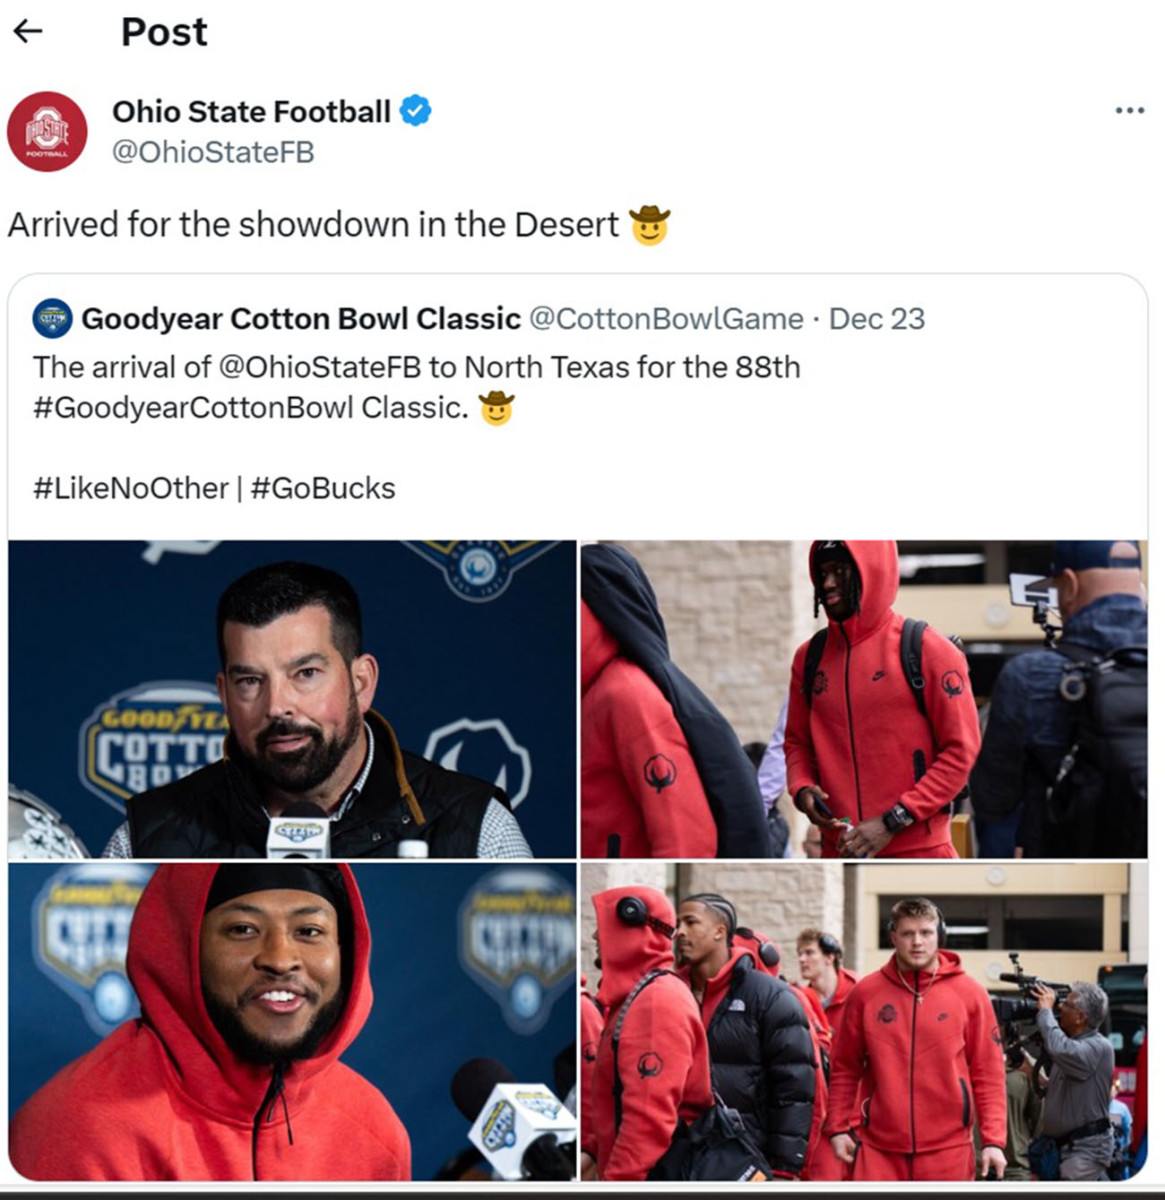 A tweet from the Ohio State Buckeyes football team’s official account.